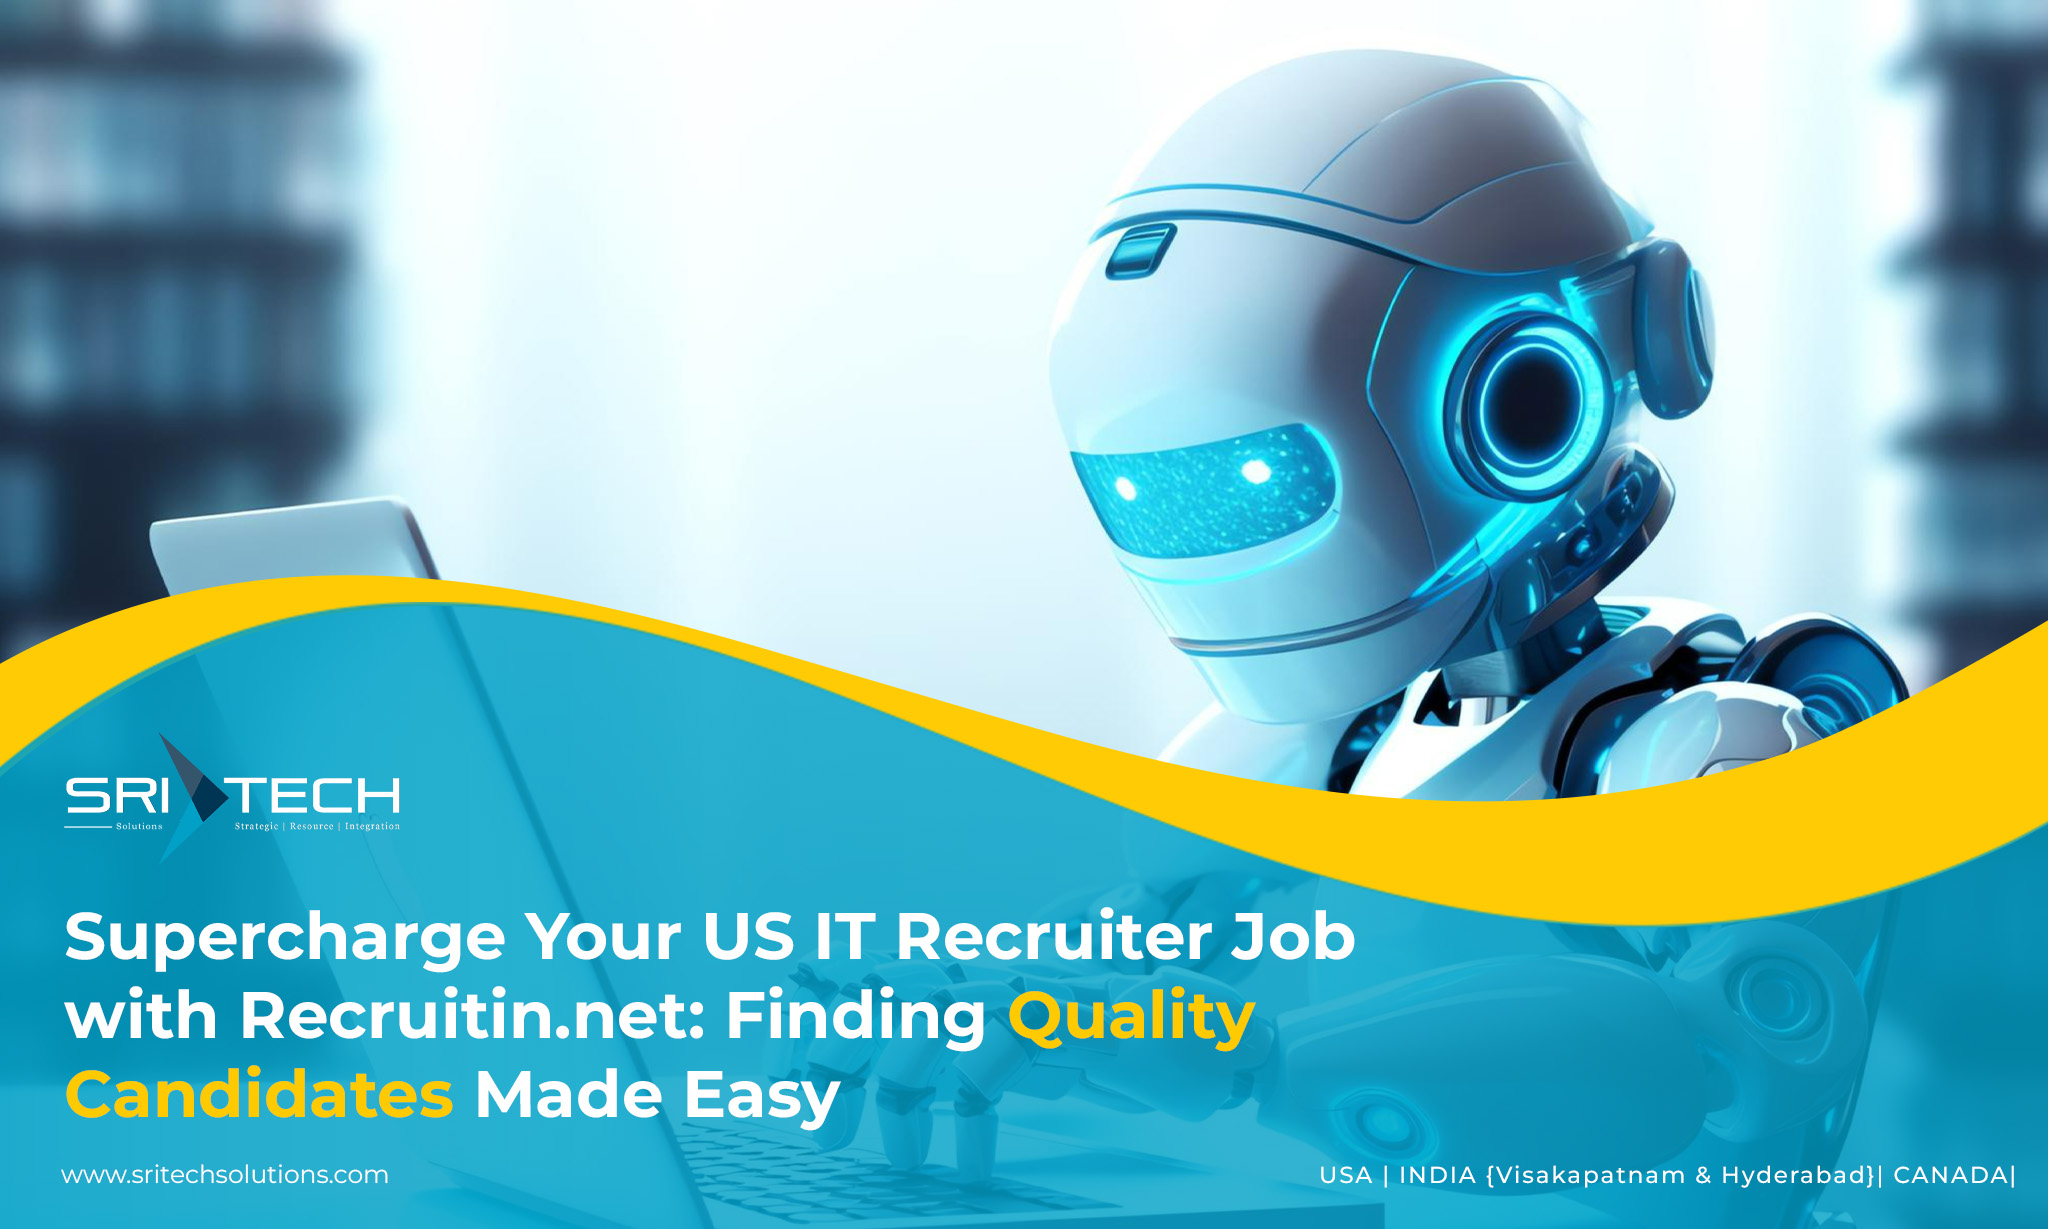 Supercharge Your US IT Recruiter Job with Recruitin.net: Quality Candidates Made Easy!